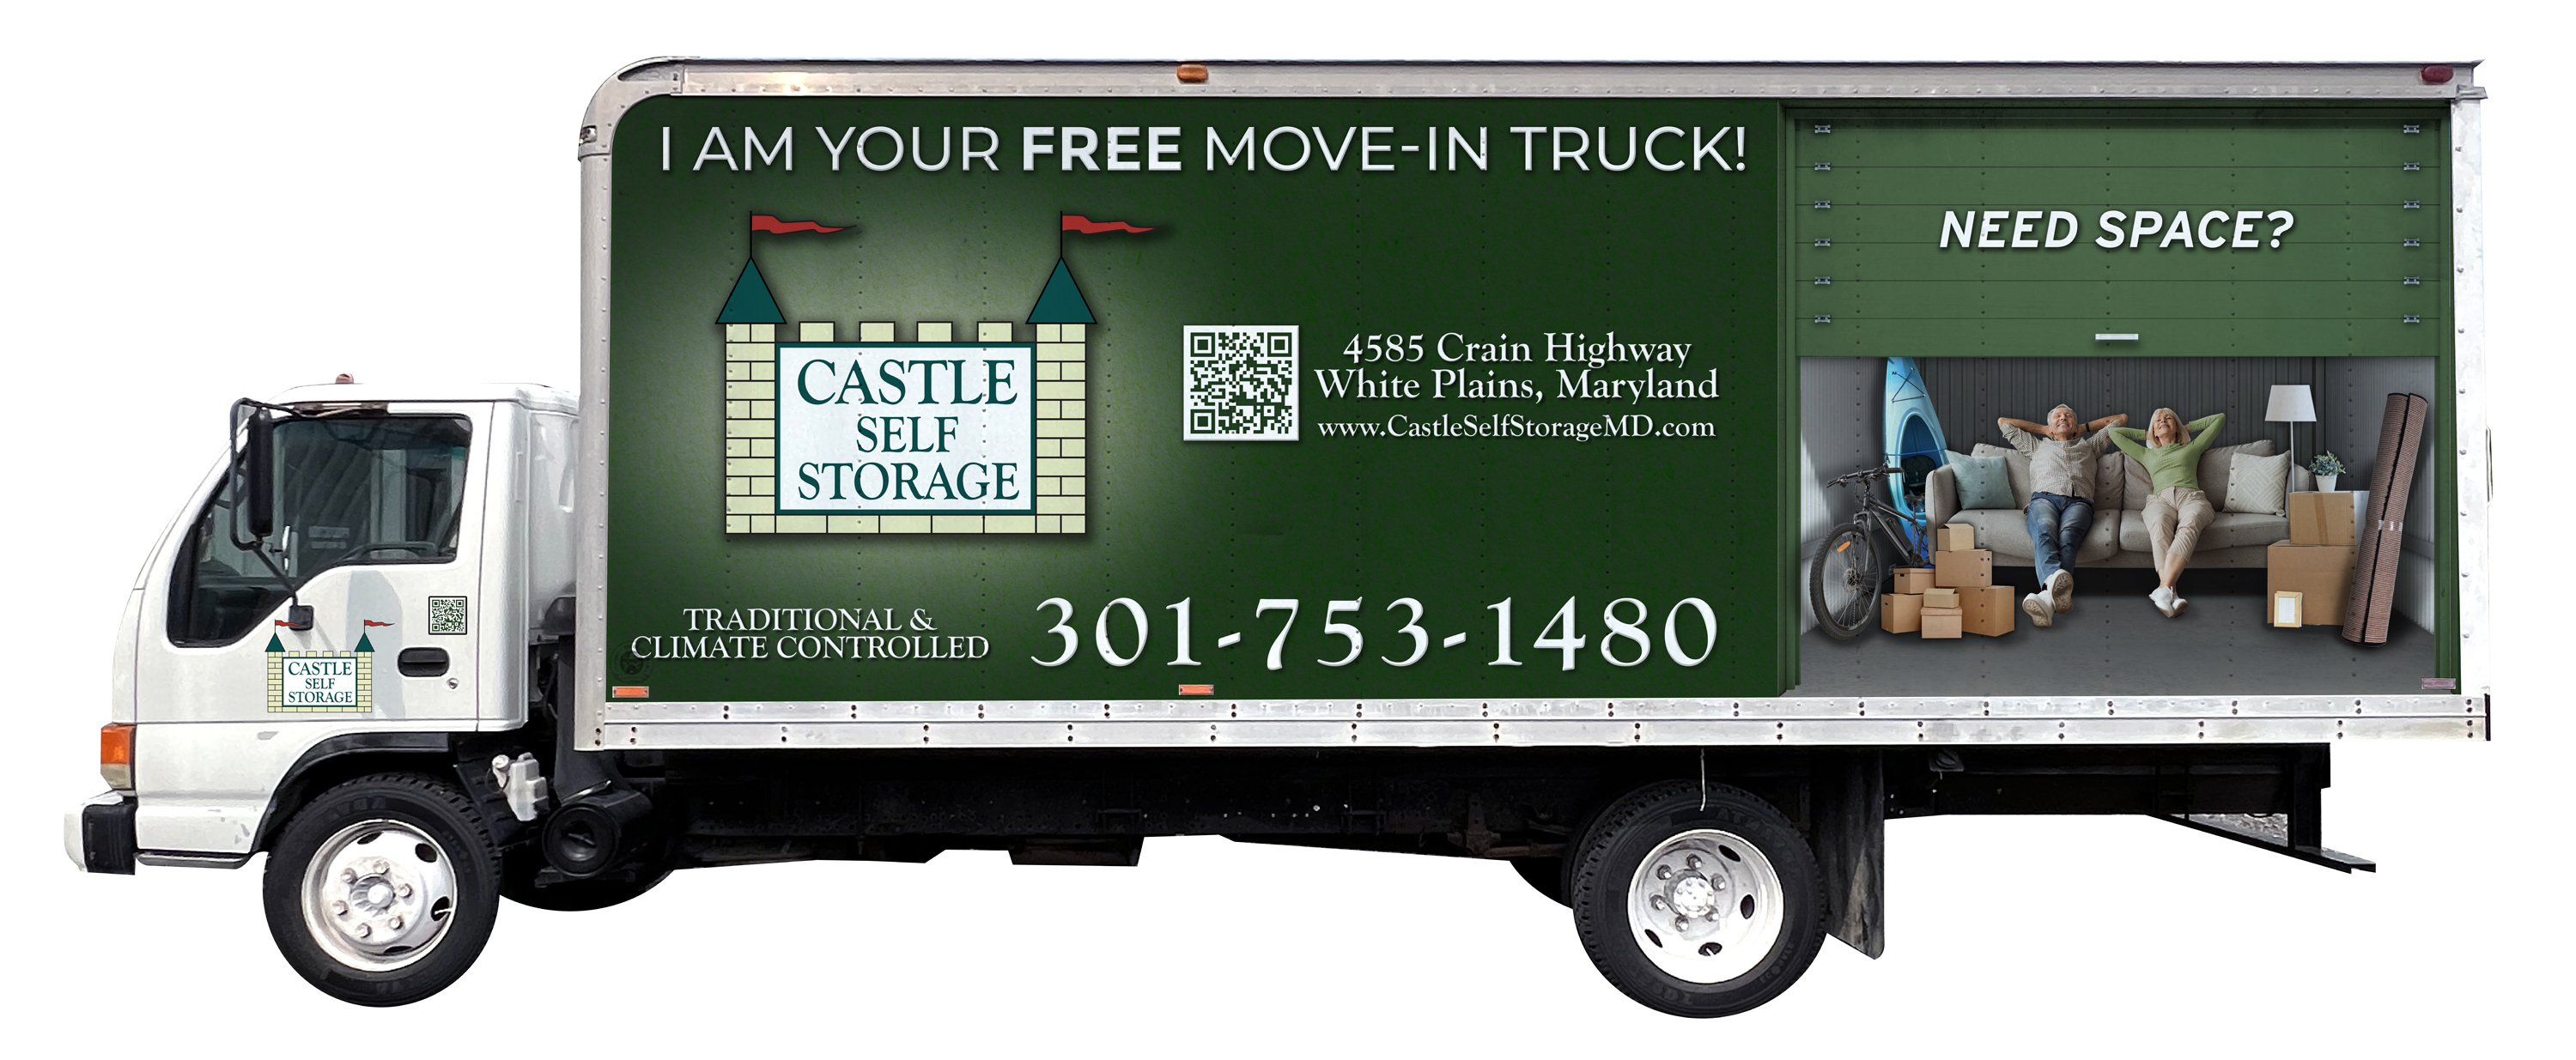 Your Free MOVE-IN Truck